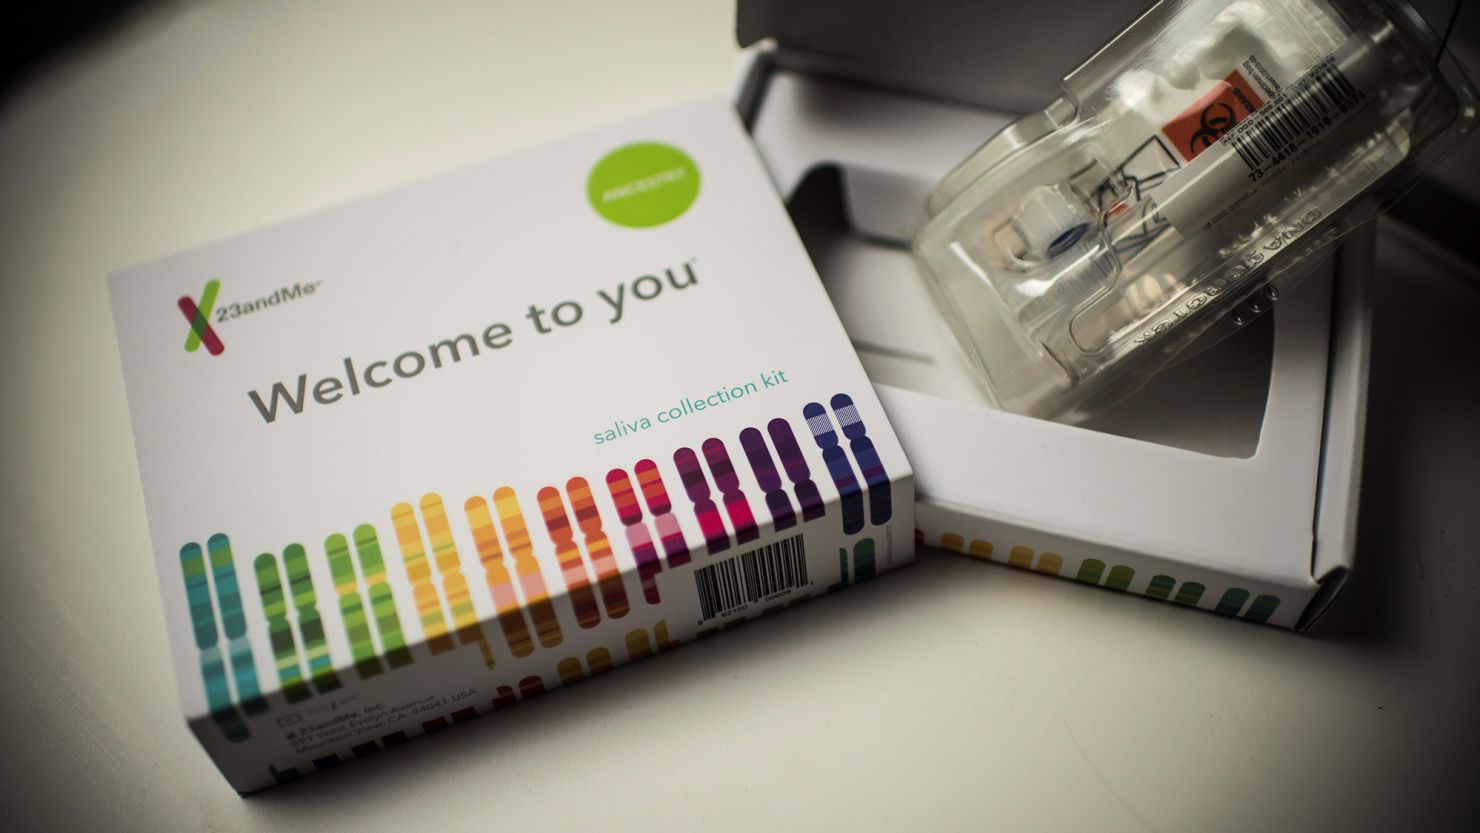 Hackers Stole the Personal Data of 7 Million 23andMe Users